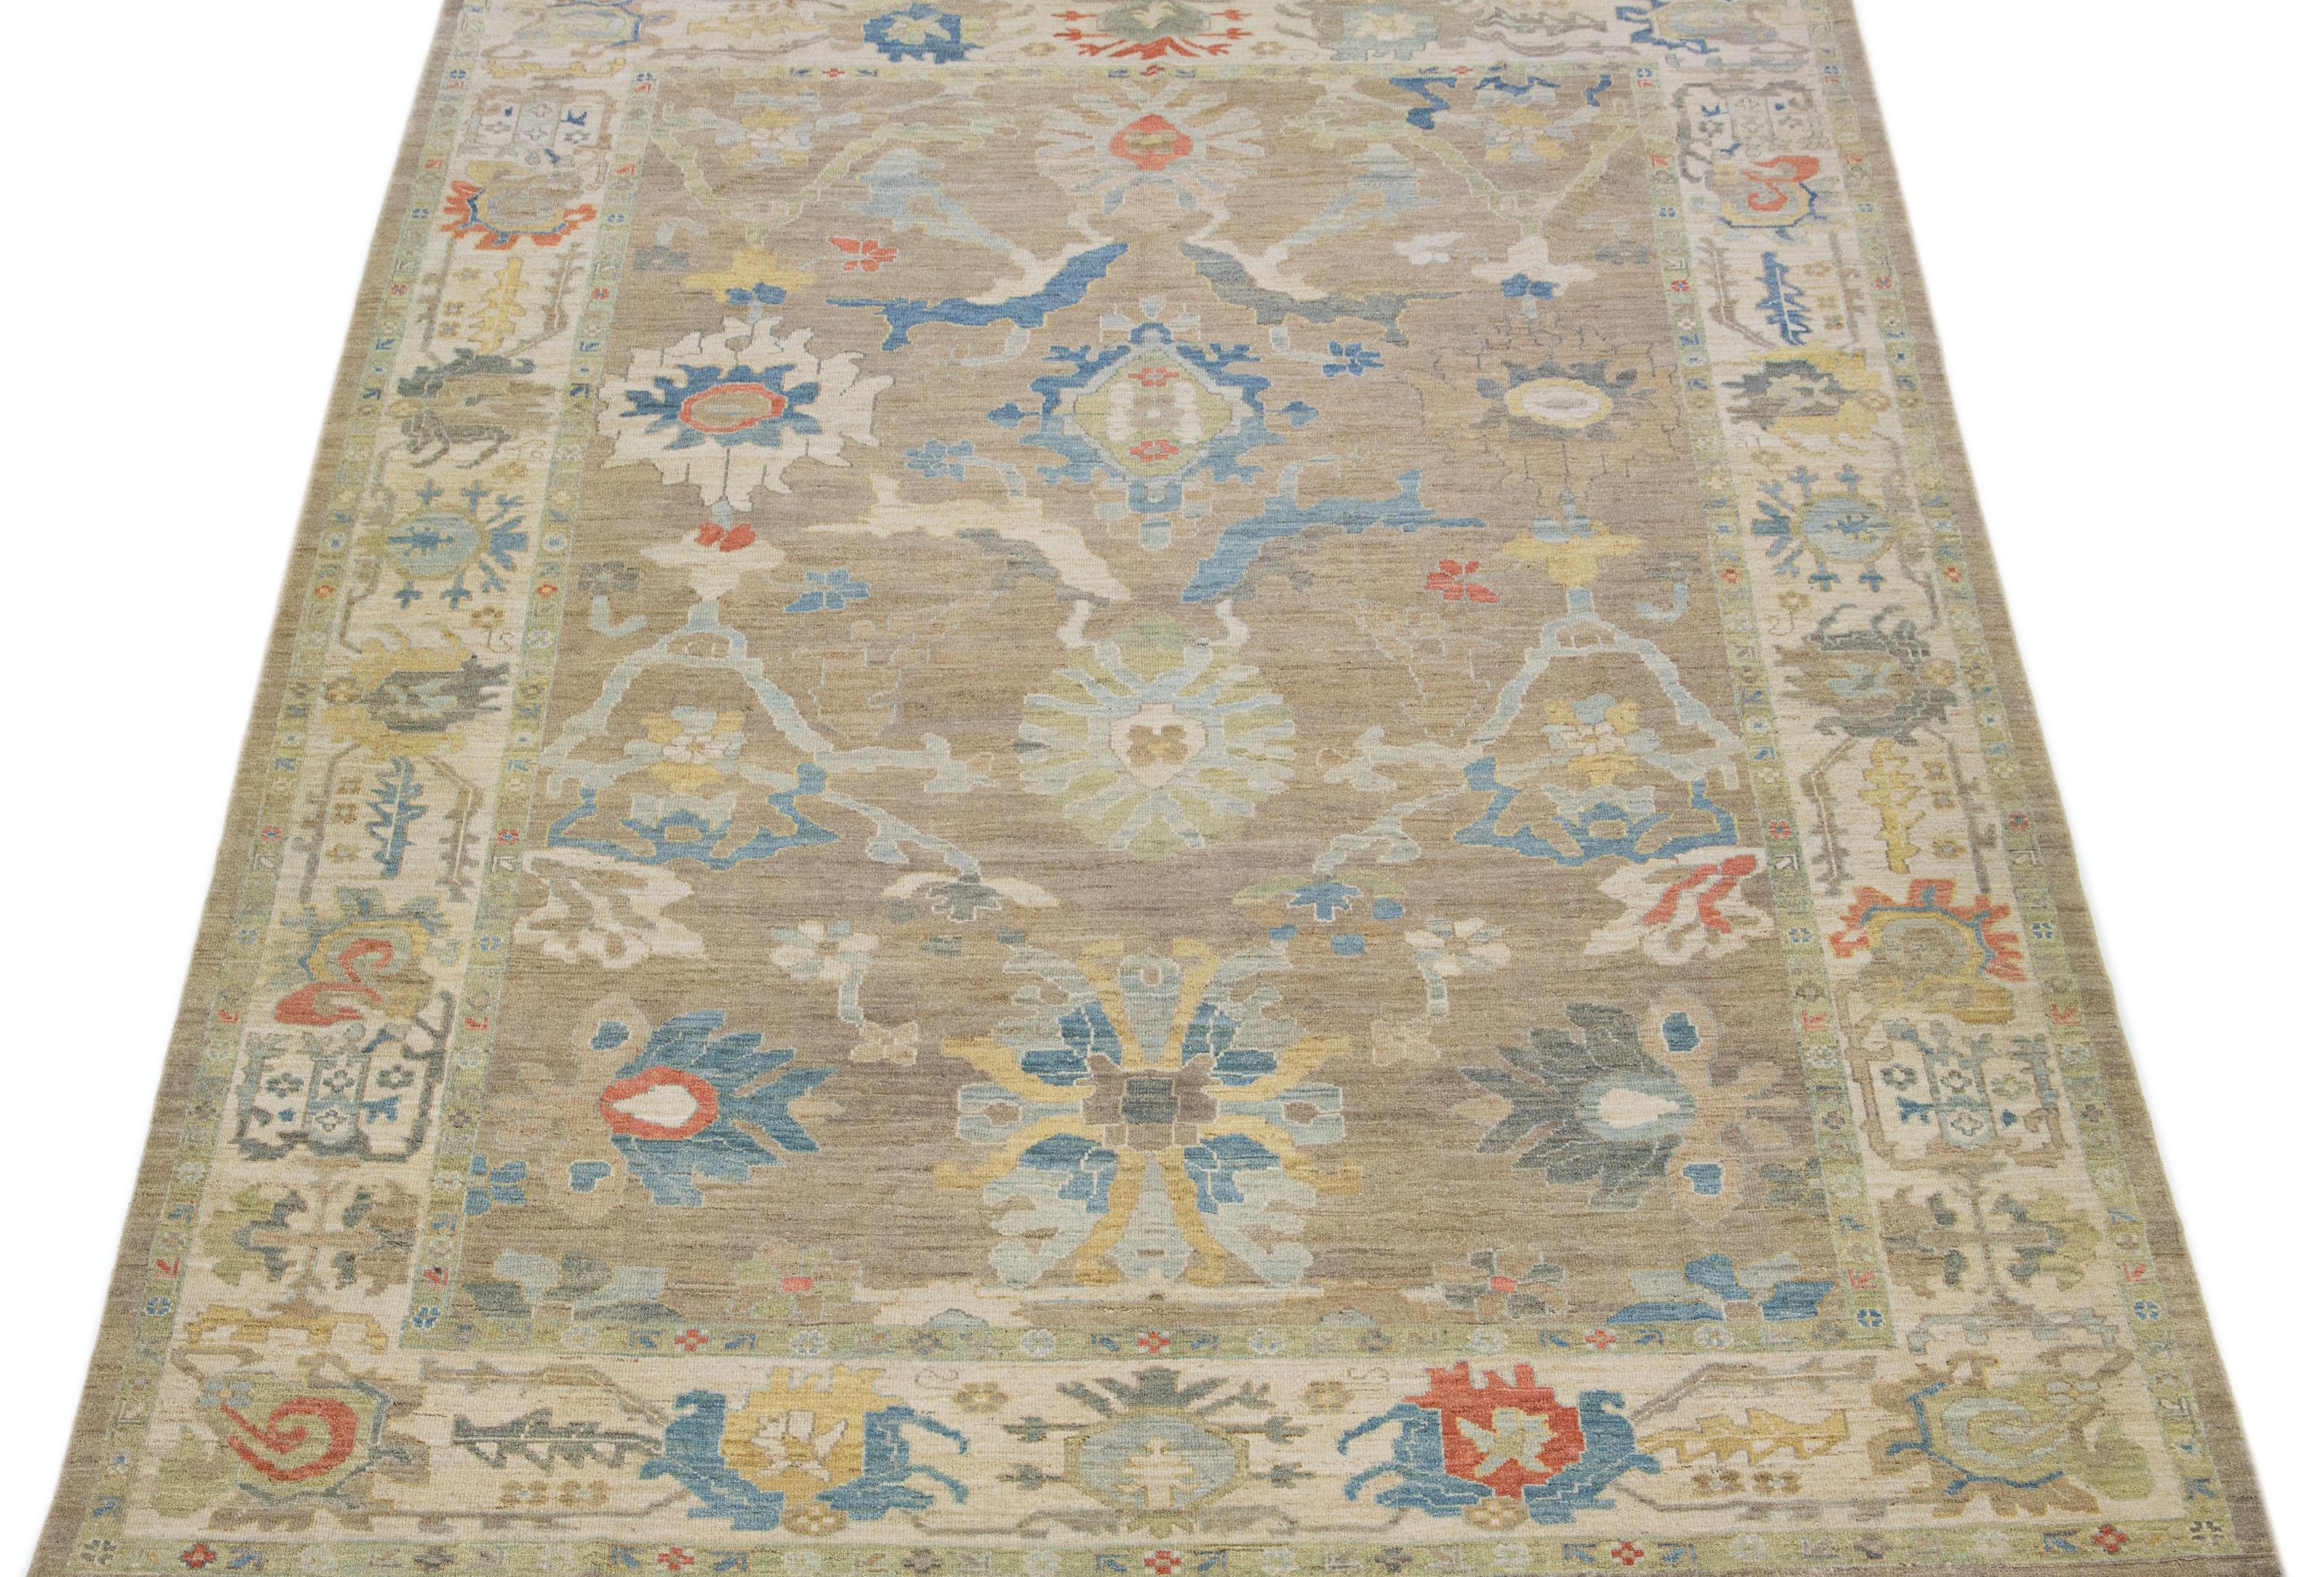 This contemporary take on the traditional Sultanabad style is showcased in an exquisite hand-knotted wool rug with a striking tan color. An intricately designed beige frame accentuates its all-over floral motif, adorned with multicolored accents